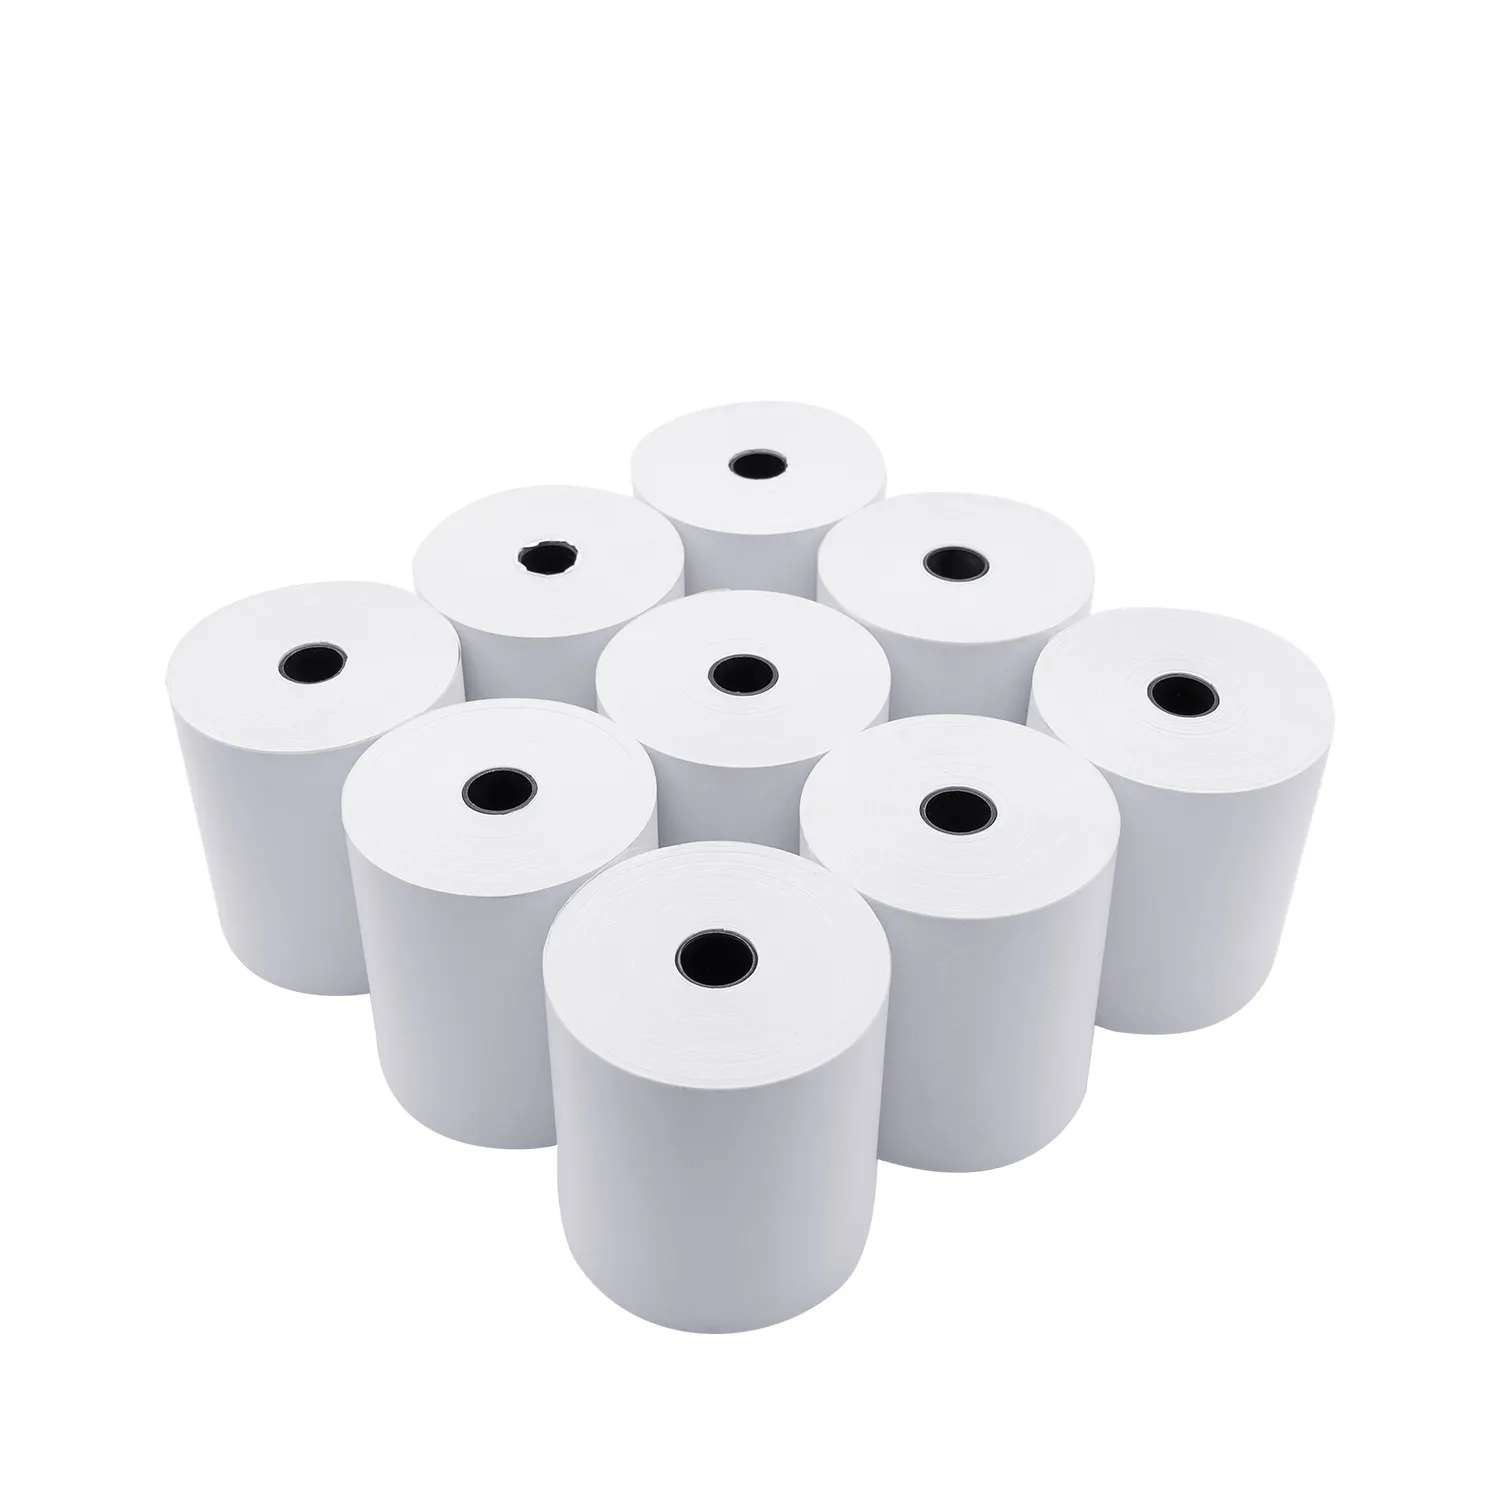 China factory direct prices thermal paper rolls cash register paper 80mm 57mm